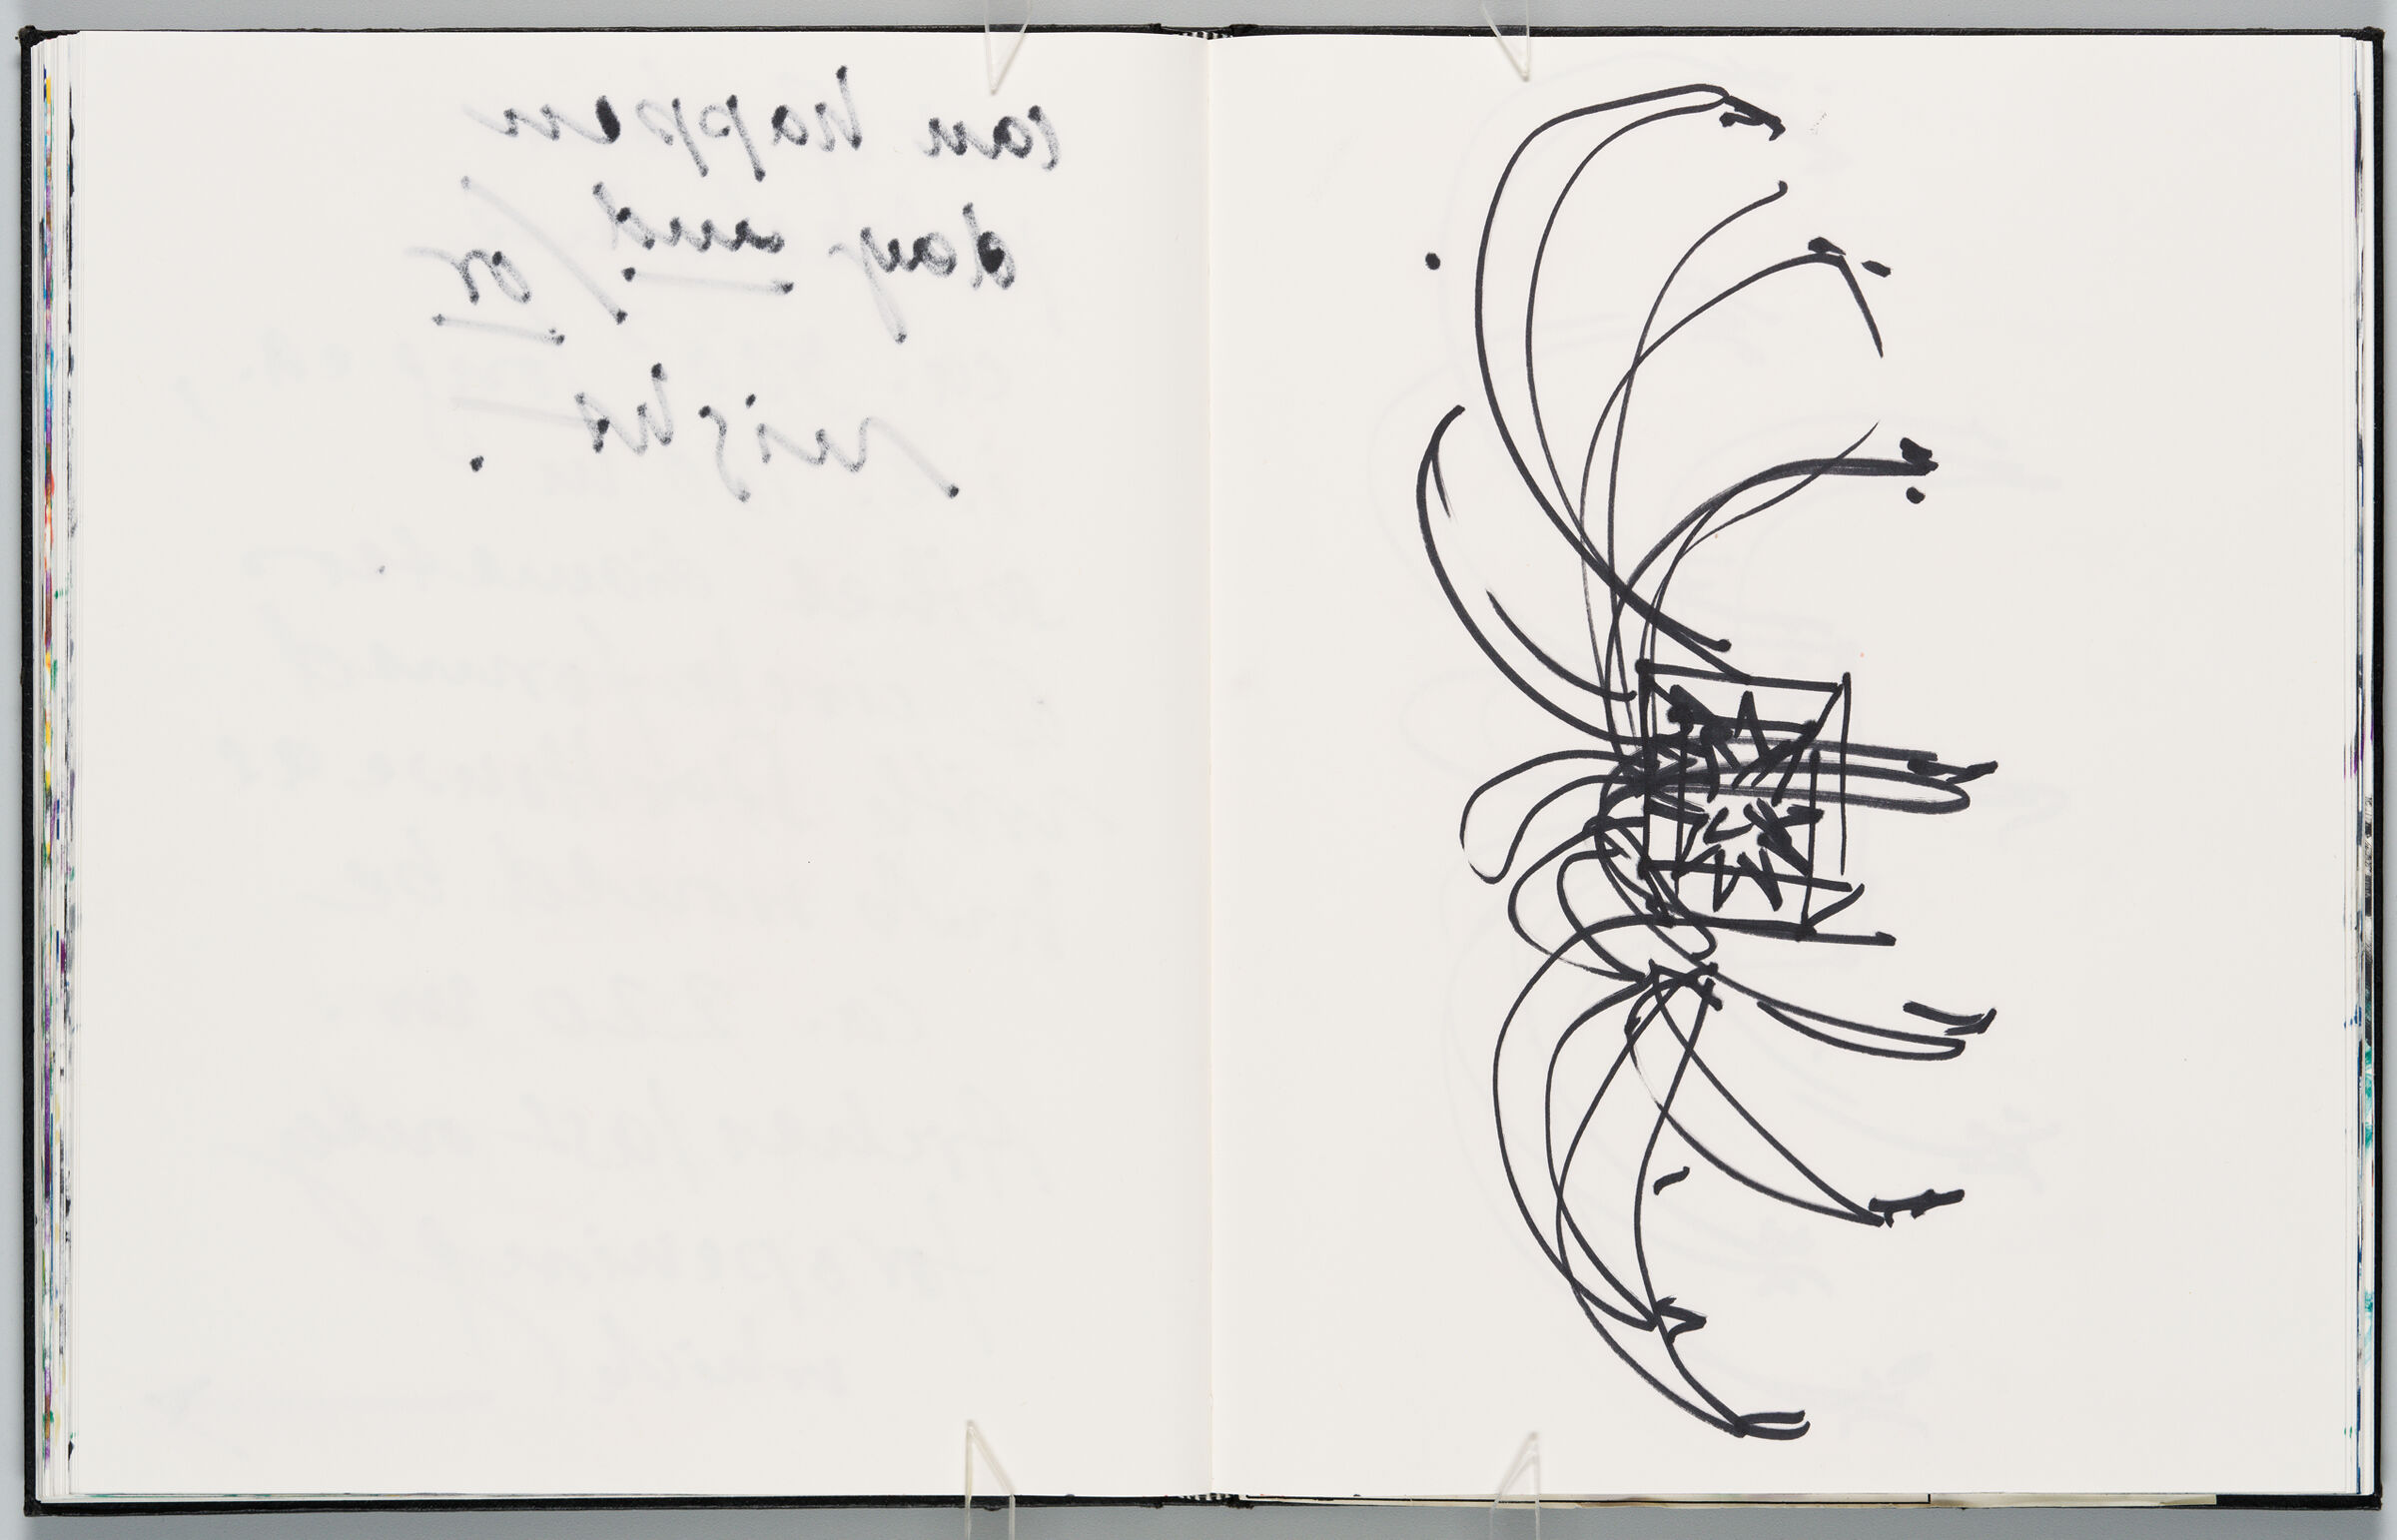 Untitled (Bleed-Through Of Previous Page, Left Page); Untitled (Design For Korea Olympics, Right Page)